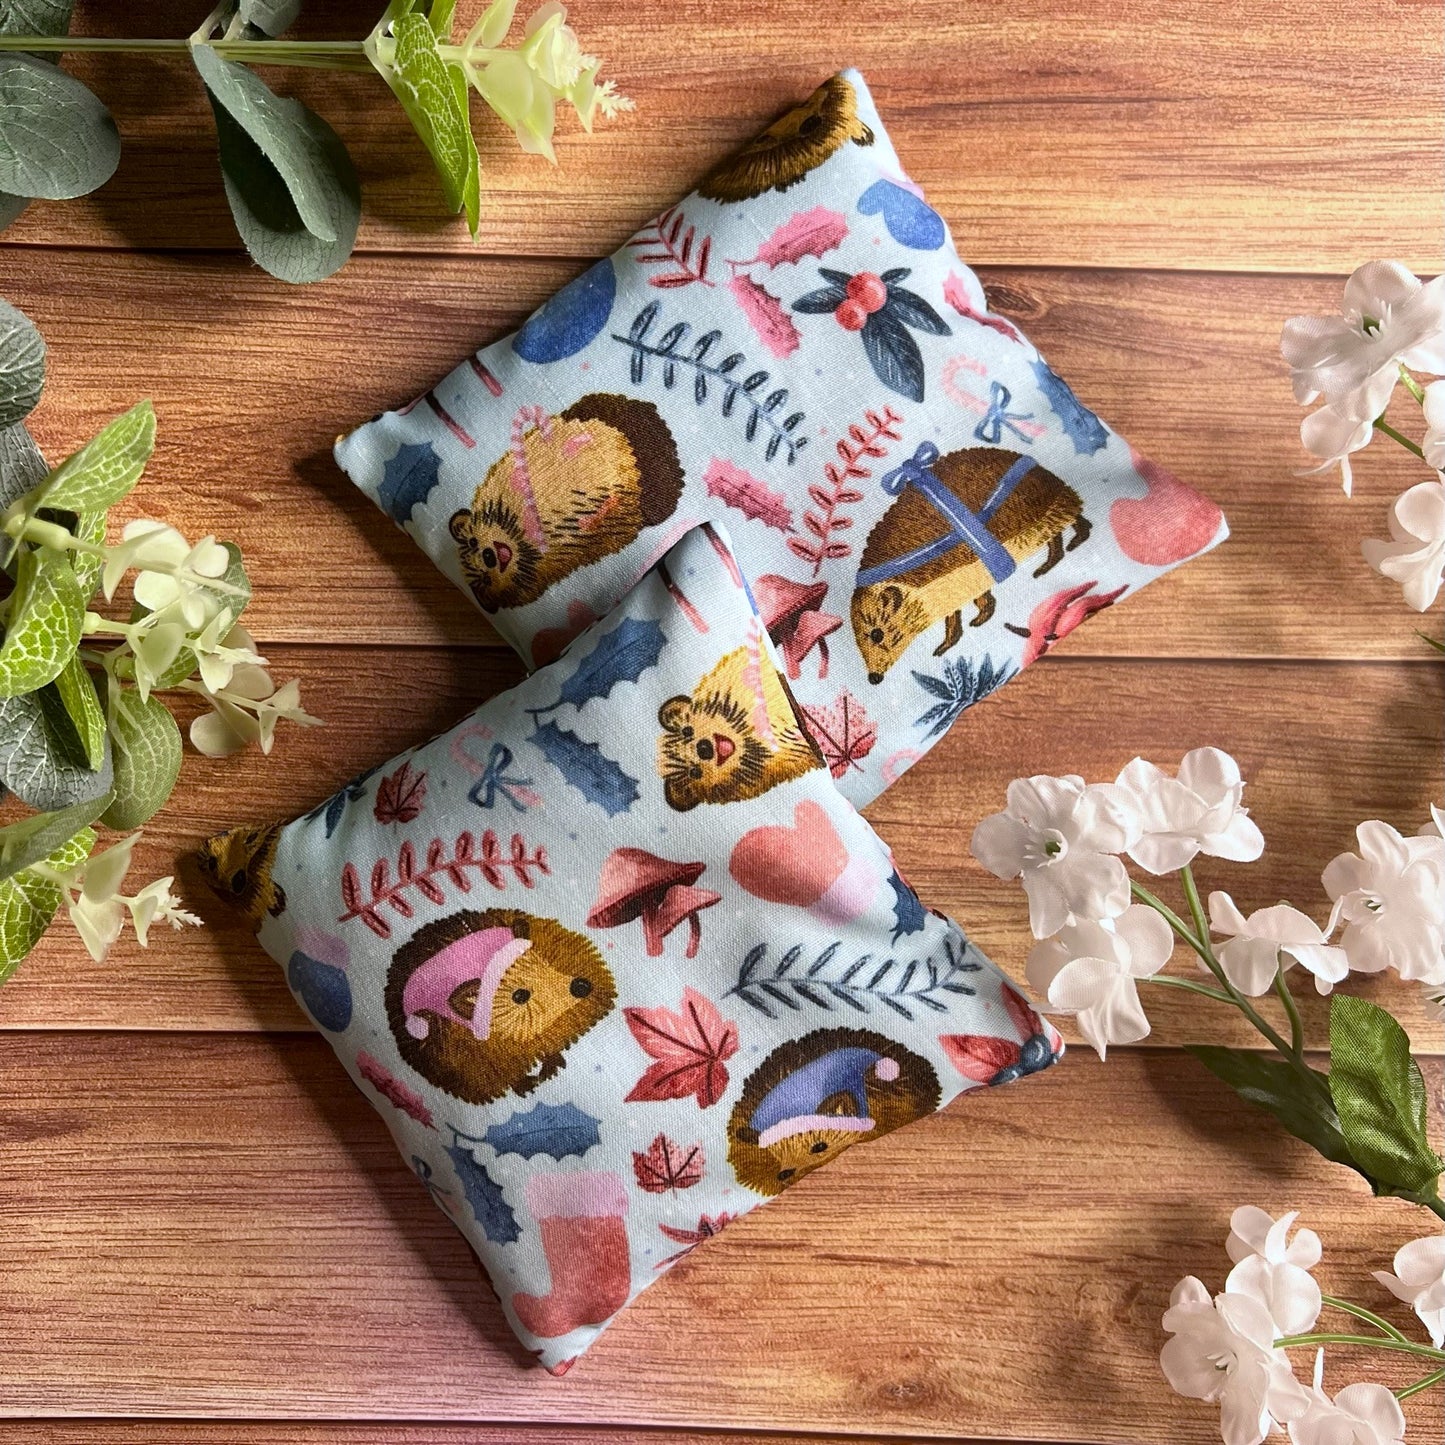 shop hand warmers gifts here with our lovely festive hedgehog pattern, and enjoy handmade crafts at christmastime